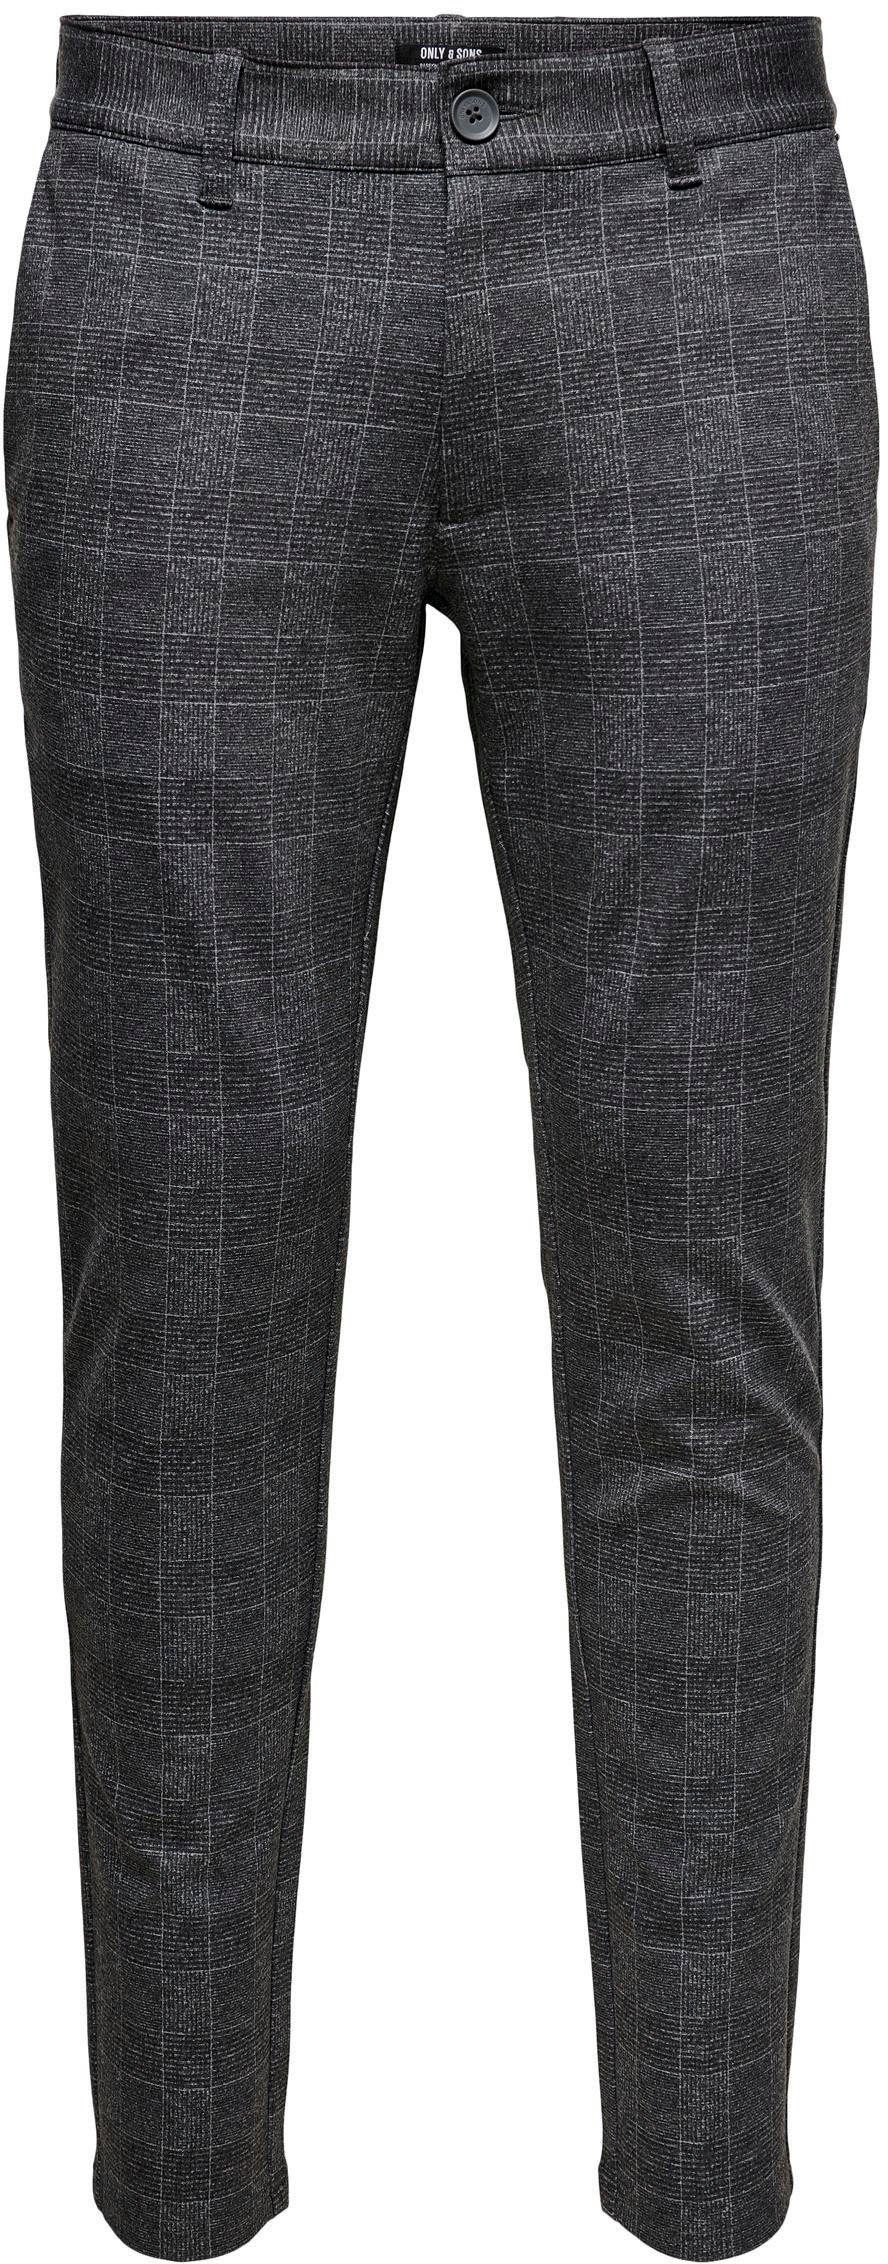 ONLY & SONS Chinohose MARK CHECK PANTS schwarz-kariert